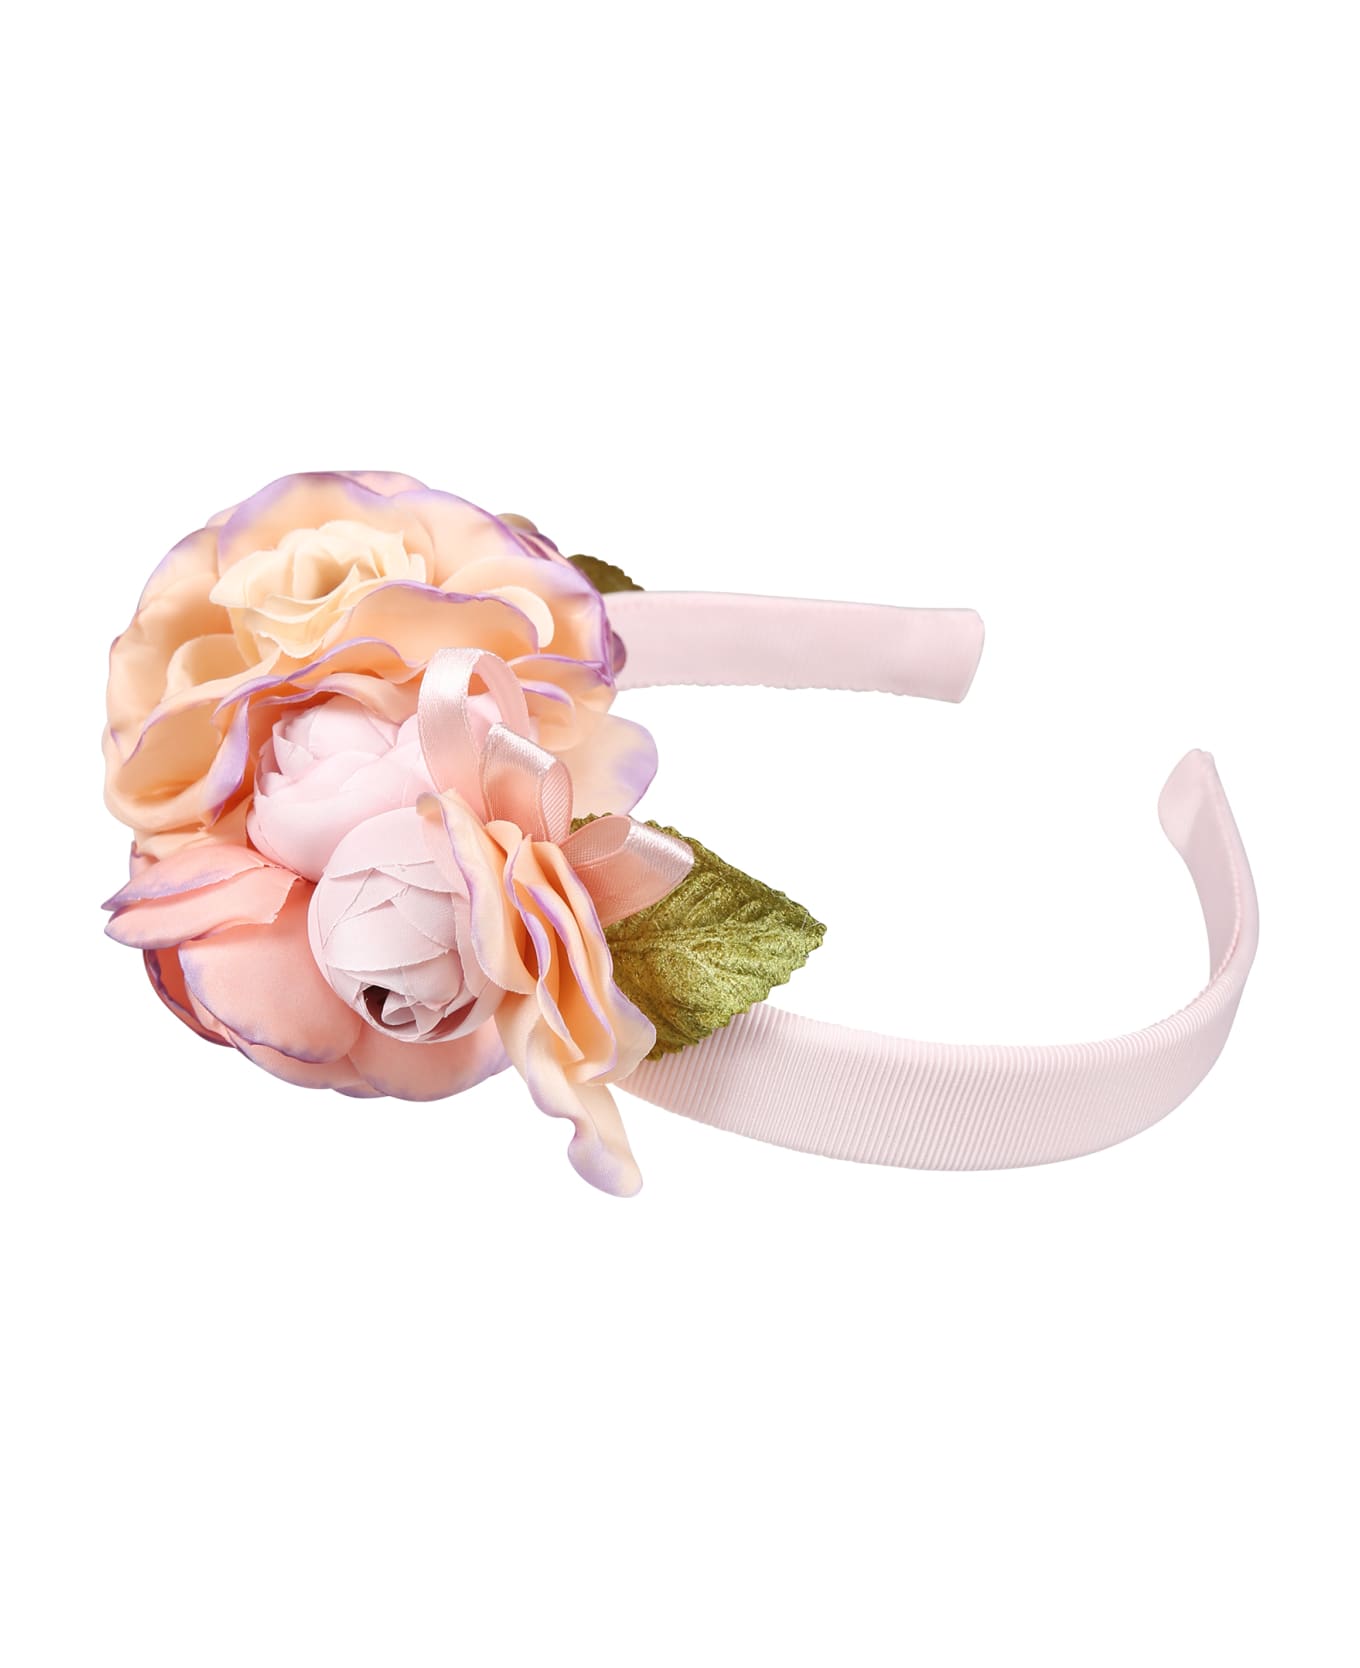 Monnalisa Pink Headband For Girl With Flowers - Pink アクセサリー＆ギフト